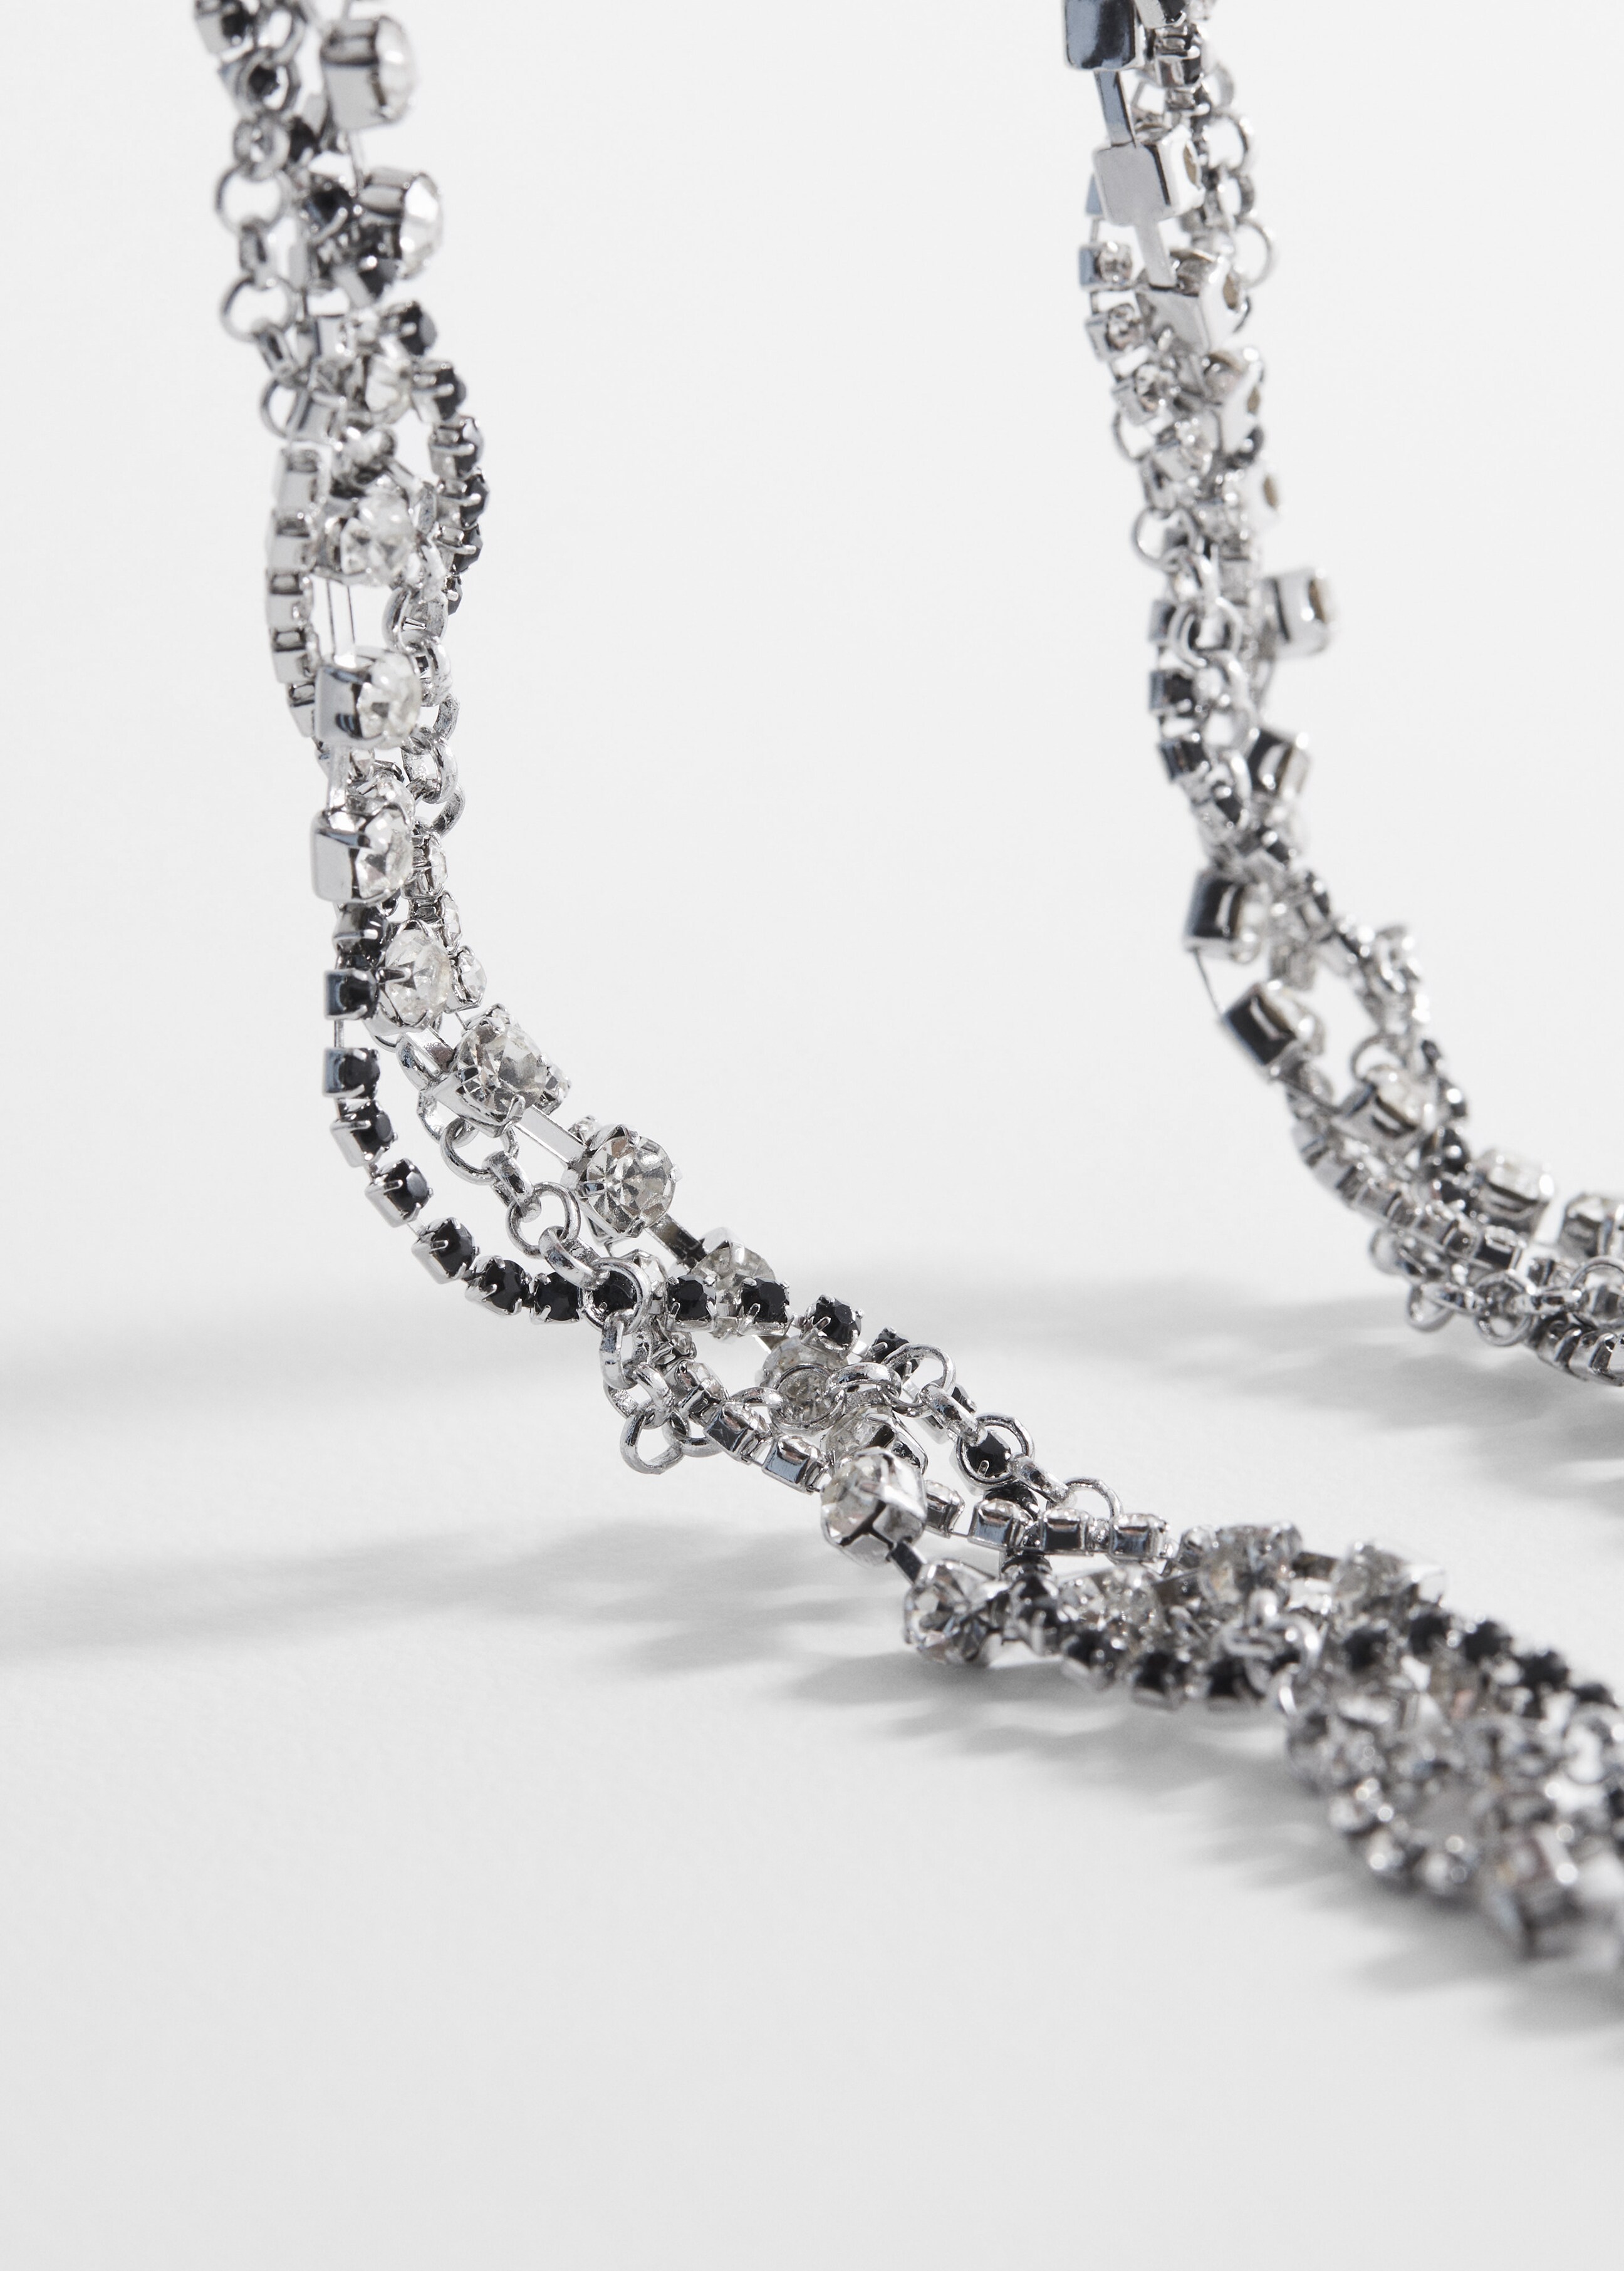 Rhinestone intertwined necklace - Details of the article 1